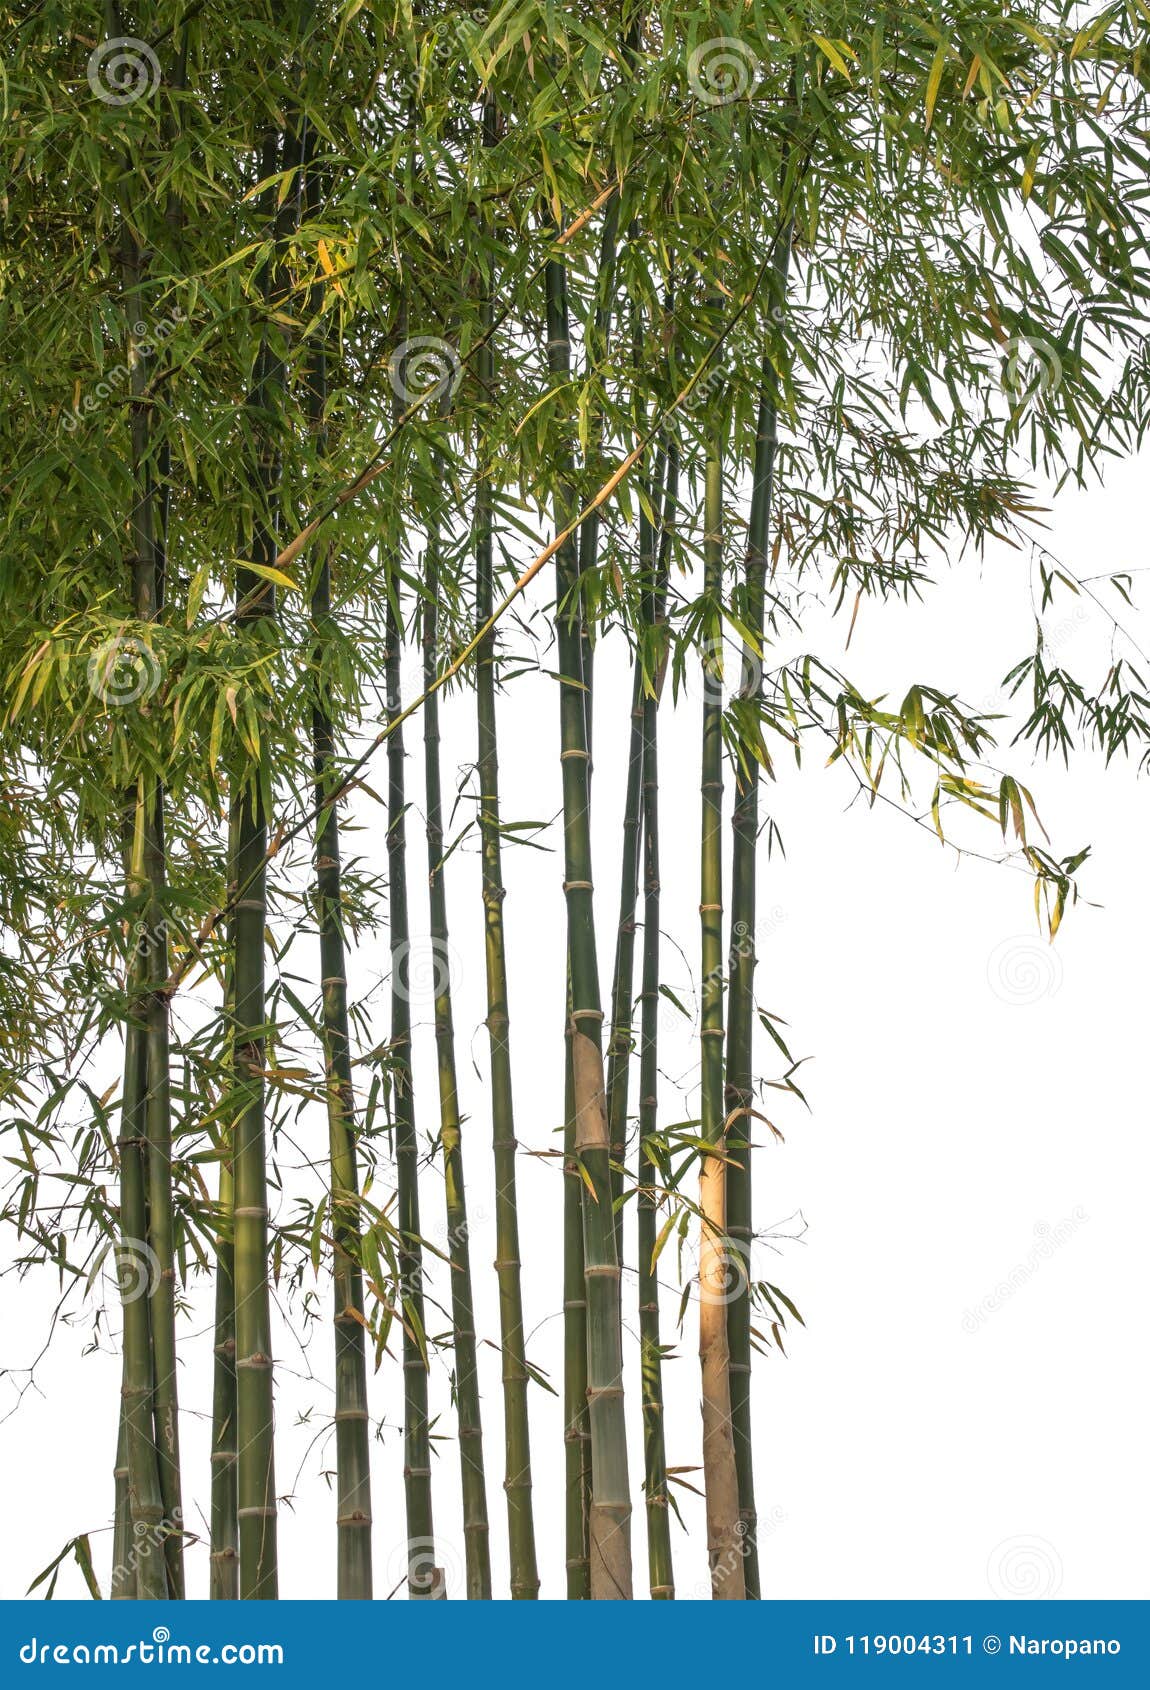 Bamboo Isolated on White Background. Clipping Path. Stock Image - Image ...